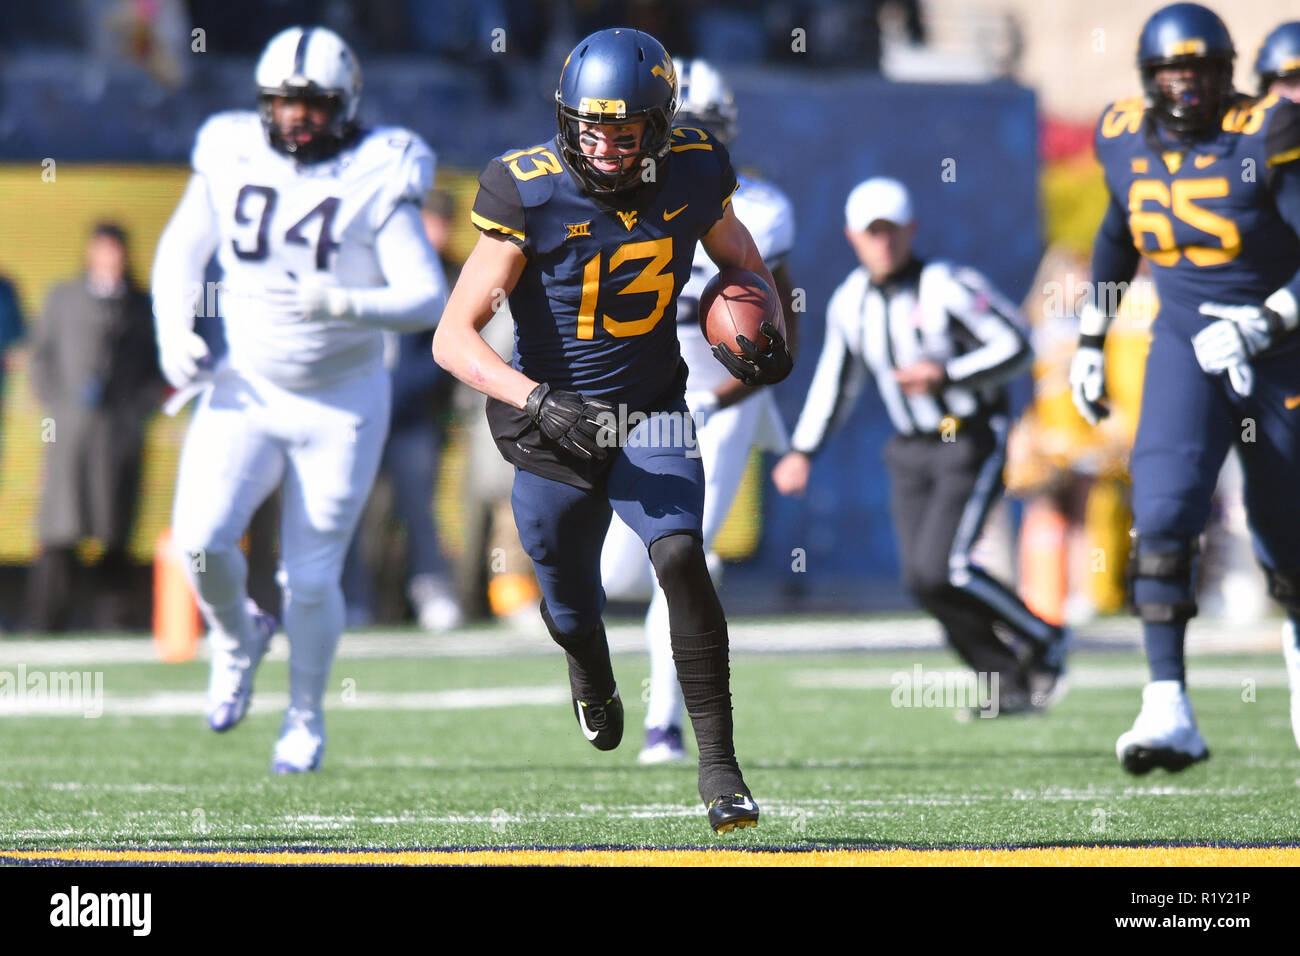 Morgantown, West Virginia, USA. 10th Nov, 2018. West Virginia Mountaineers wide receiver DAVID SILLS V (13) runs with the ball after a catch during the Big 12 football game played at Mountaineer Field in Morgantown, WV. #9 WVU beat TCU 47-10 Credit: Ken Inness/ZUMA Wire/Alamy Live News Stock Photo